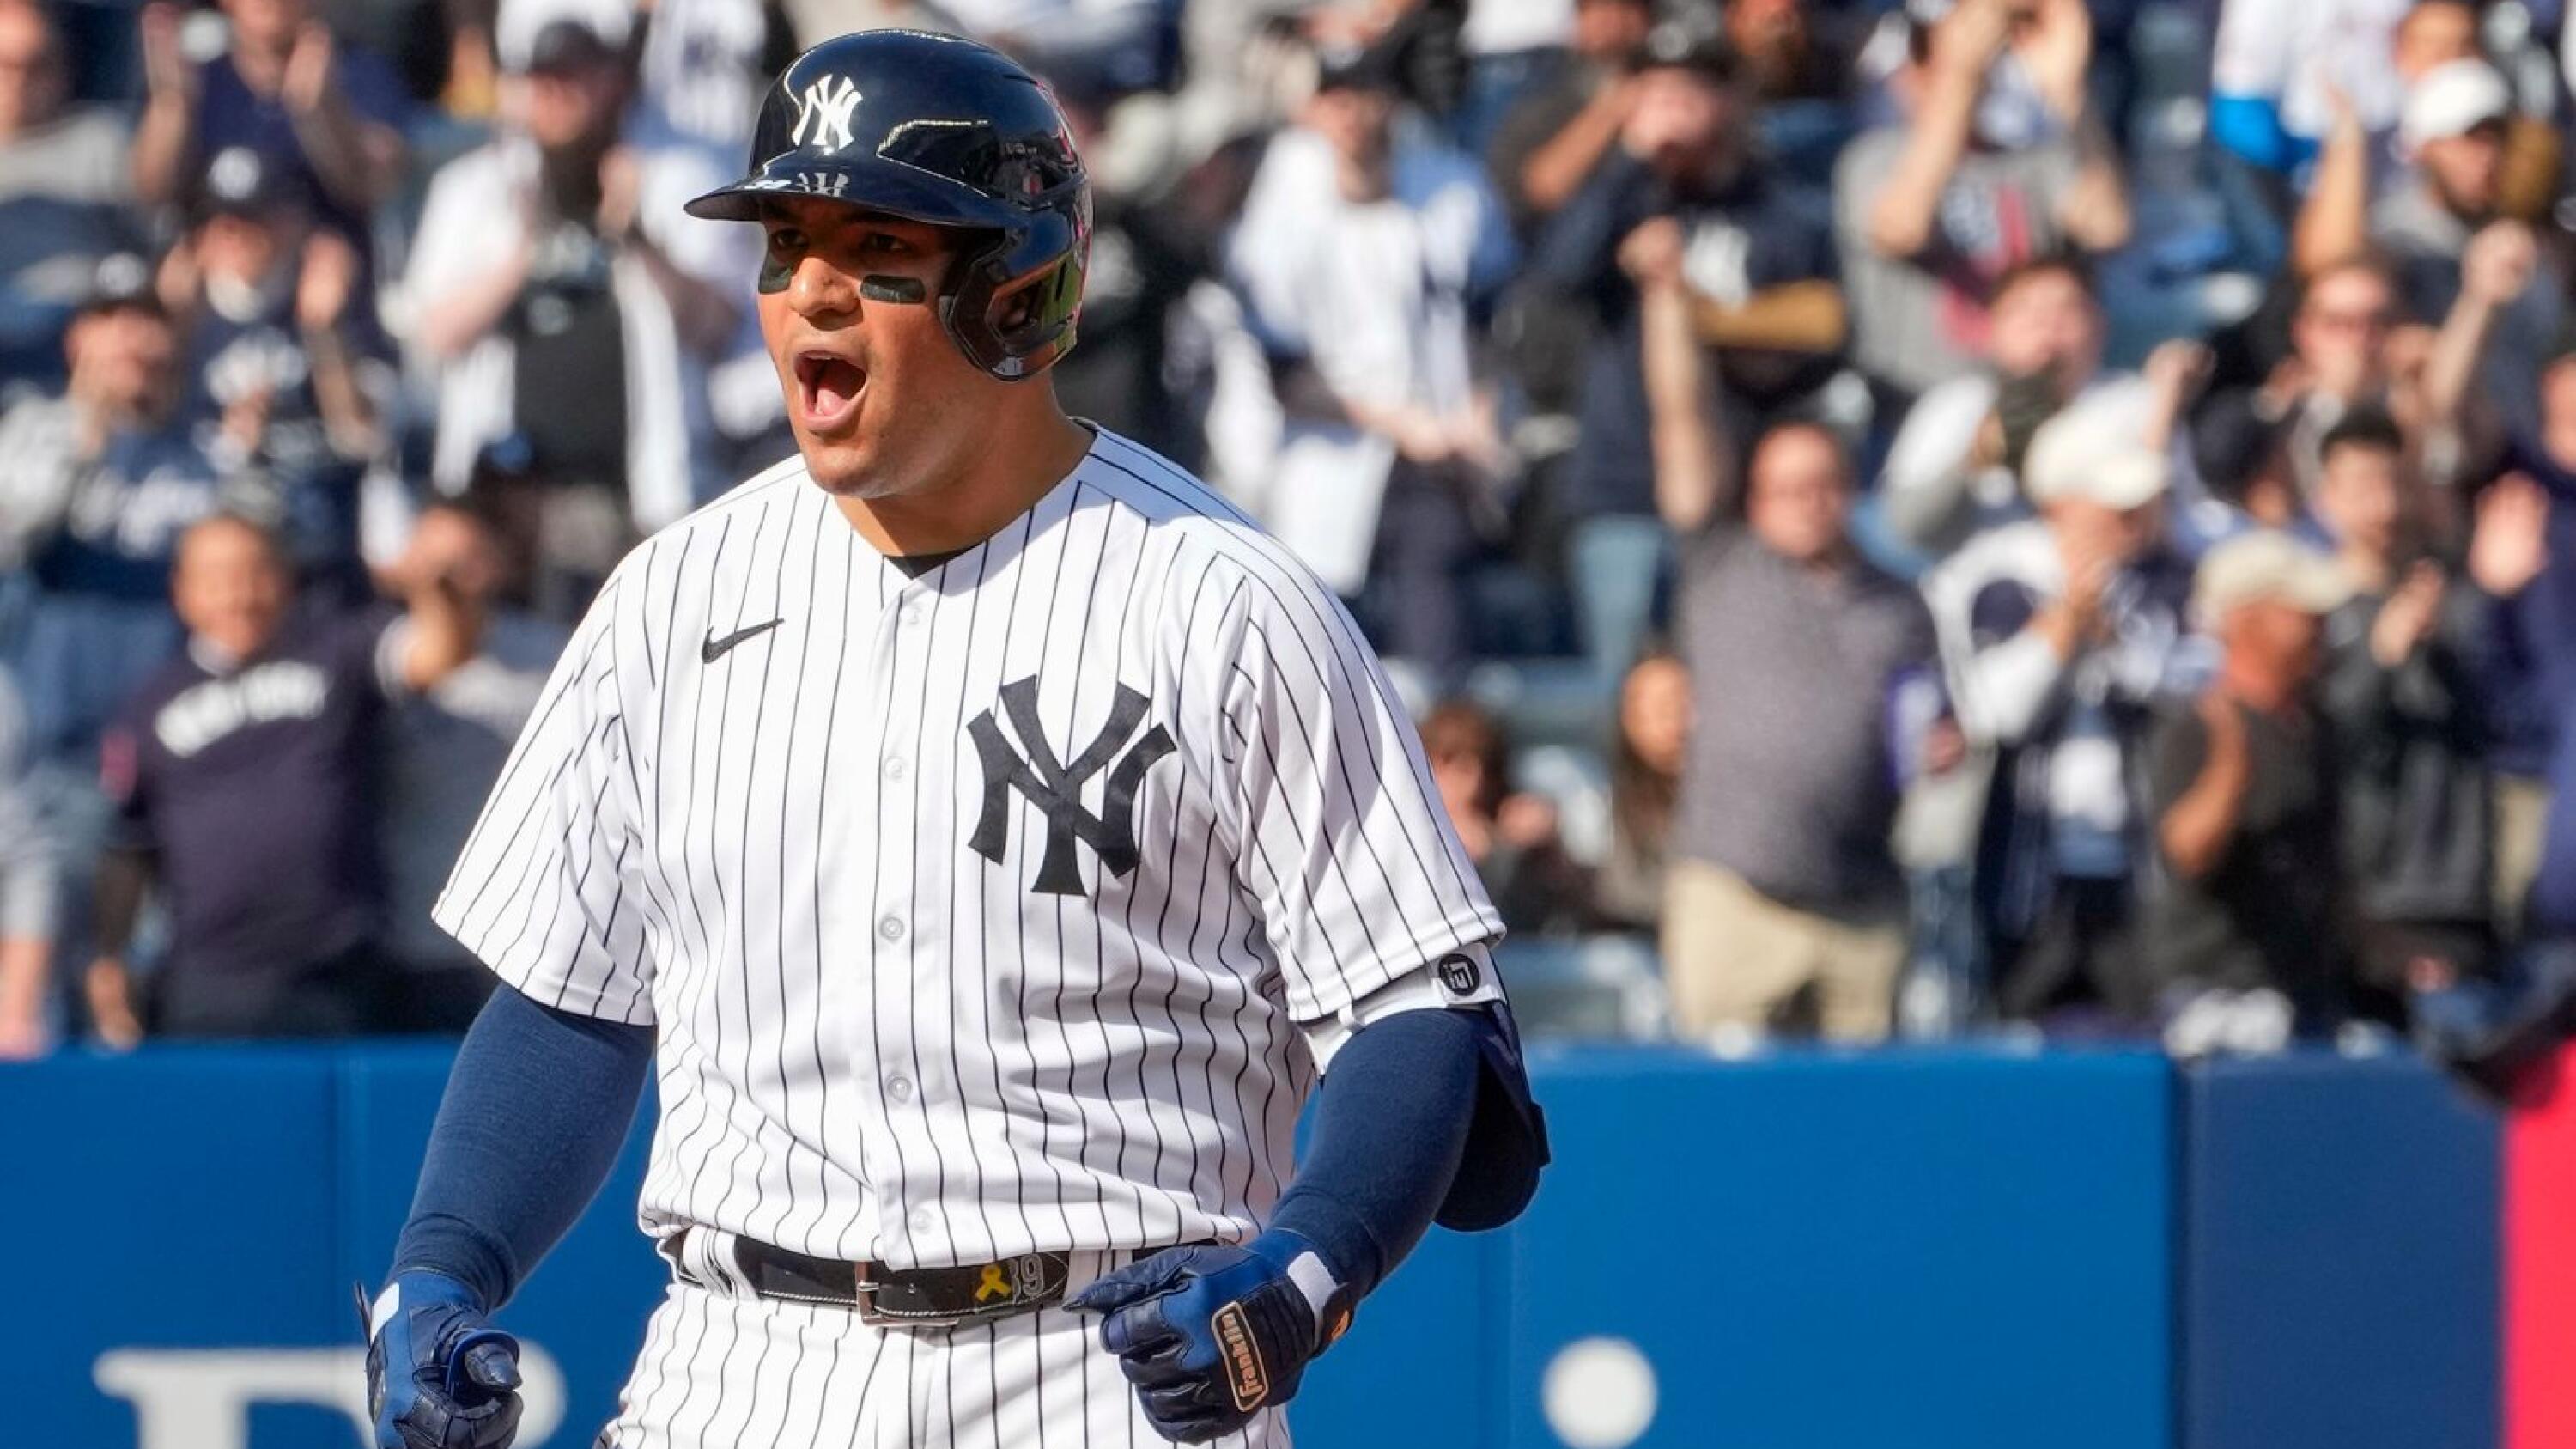 Yankees beat Angels 5-2, advance to World Series